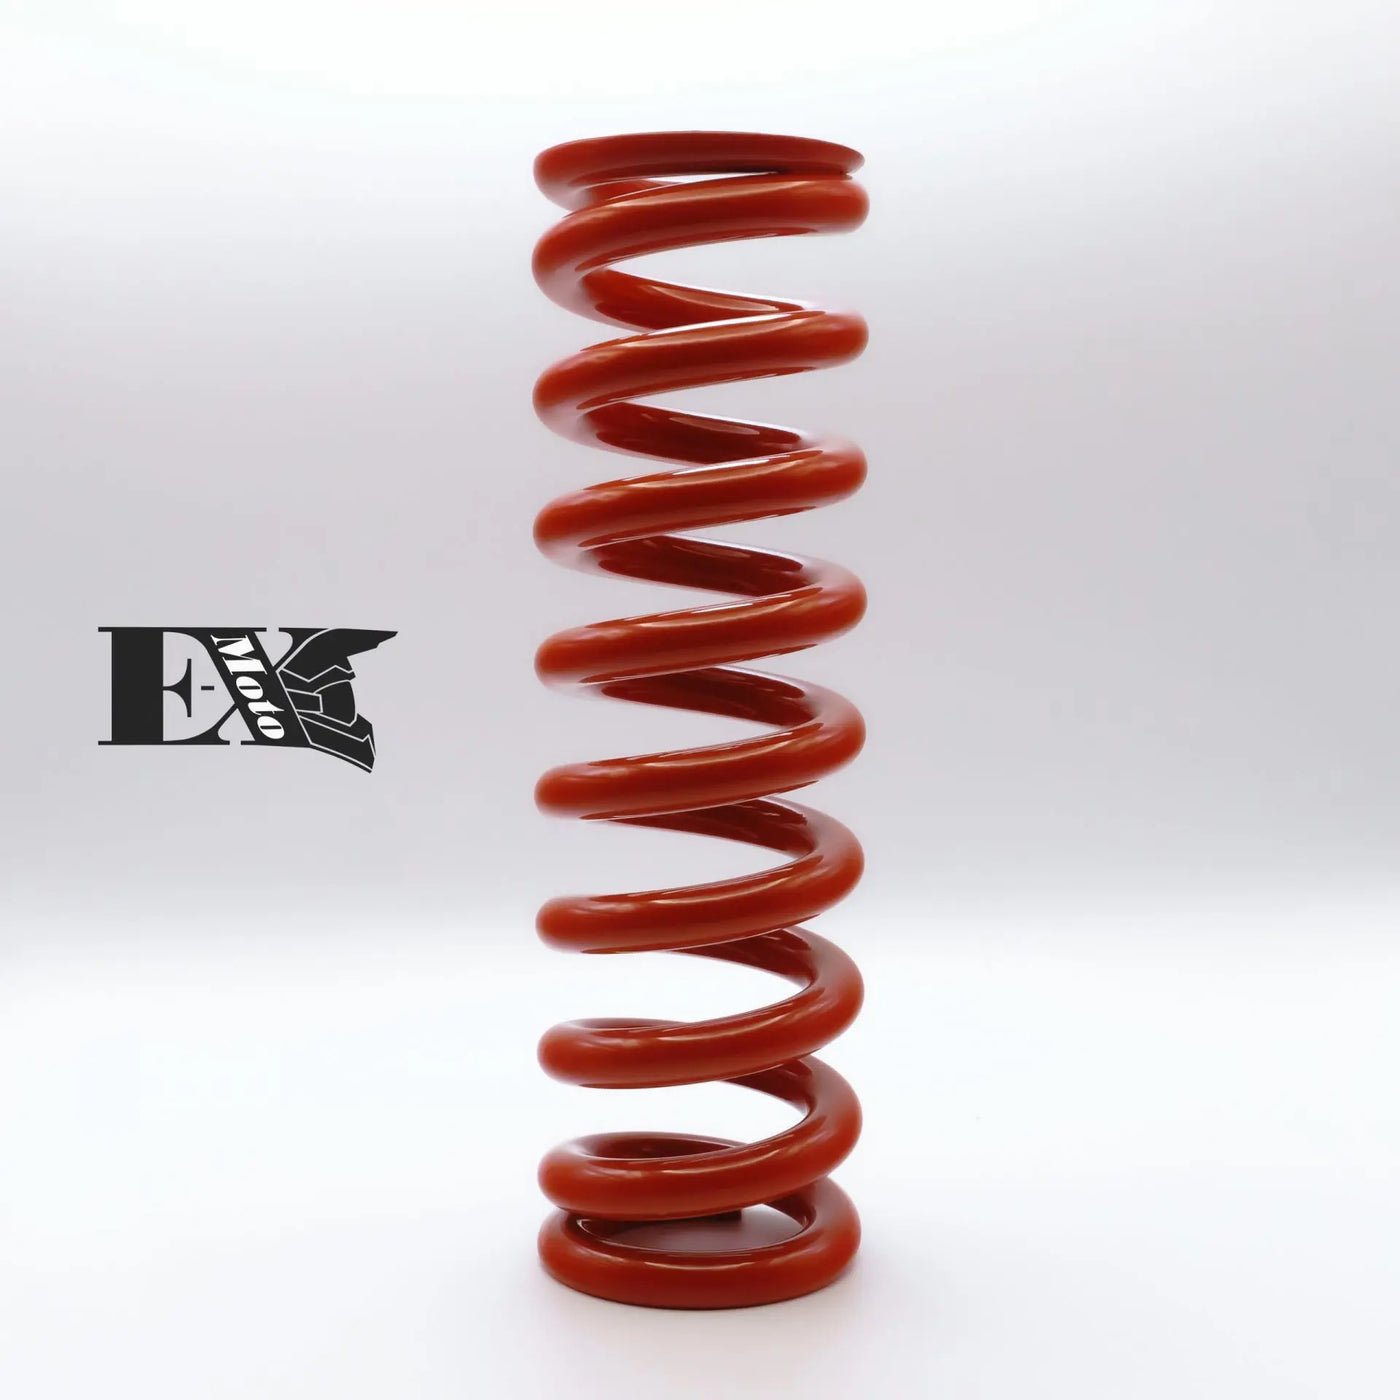 Rear Shock Absorber Spring - Red 550LBS - Surron Light Bee